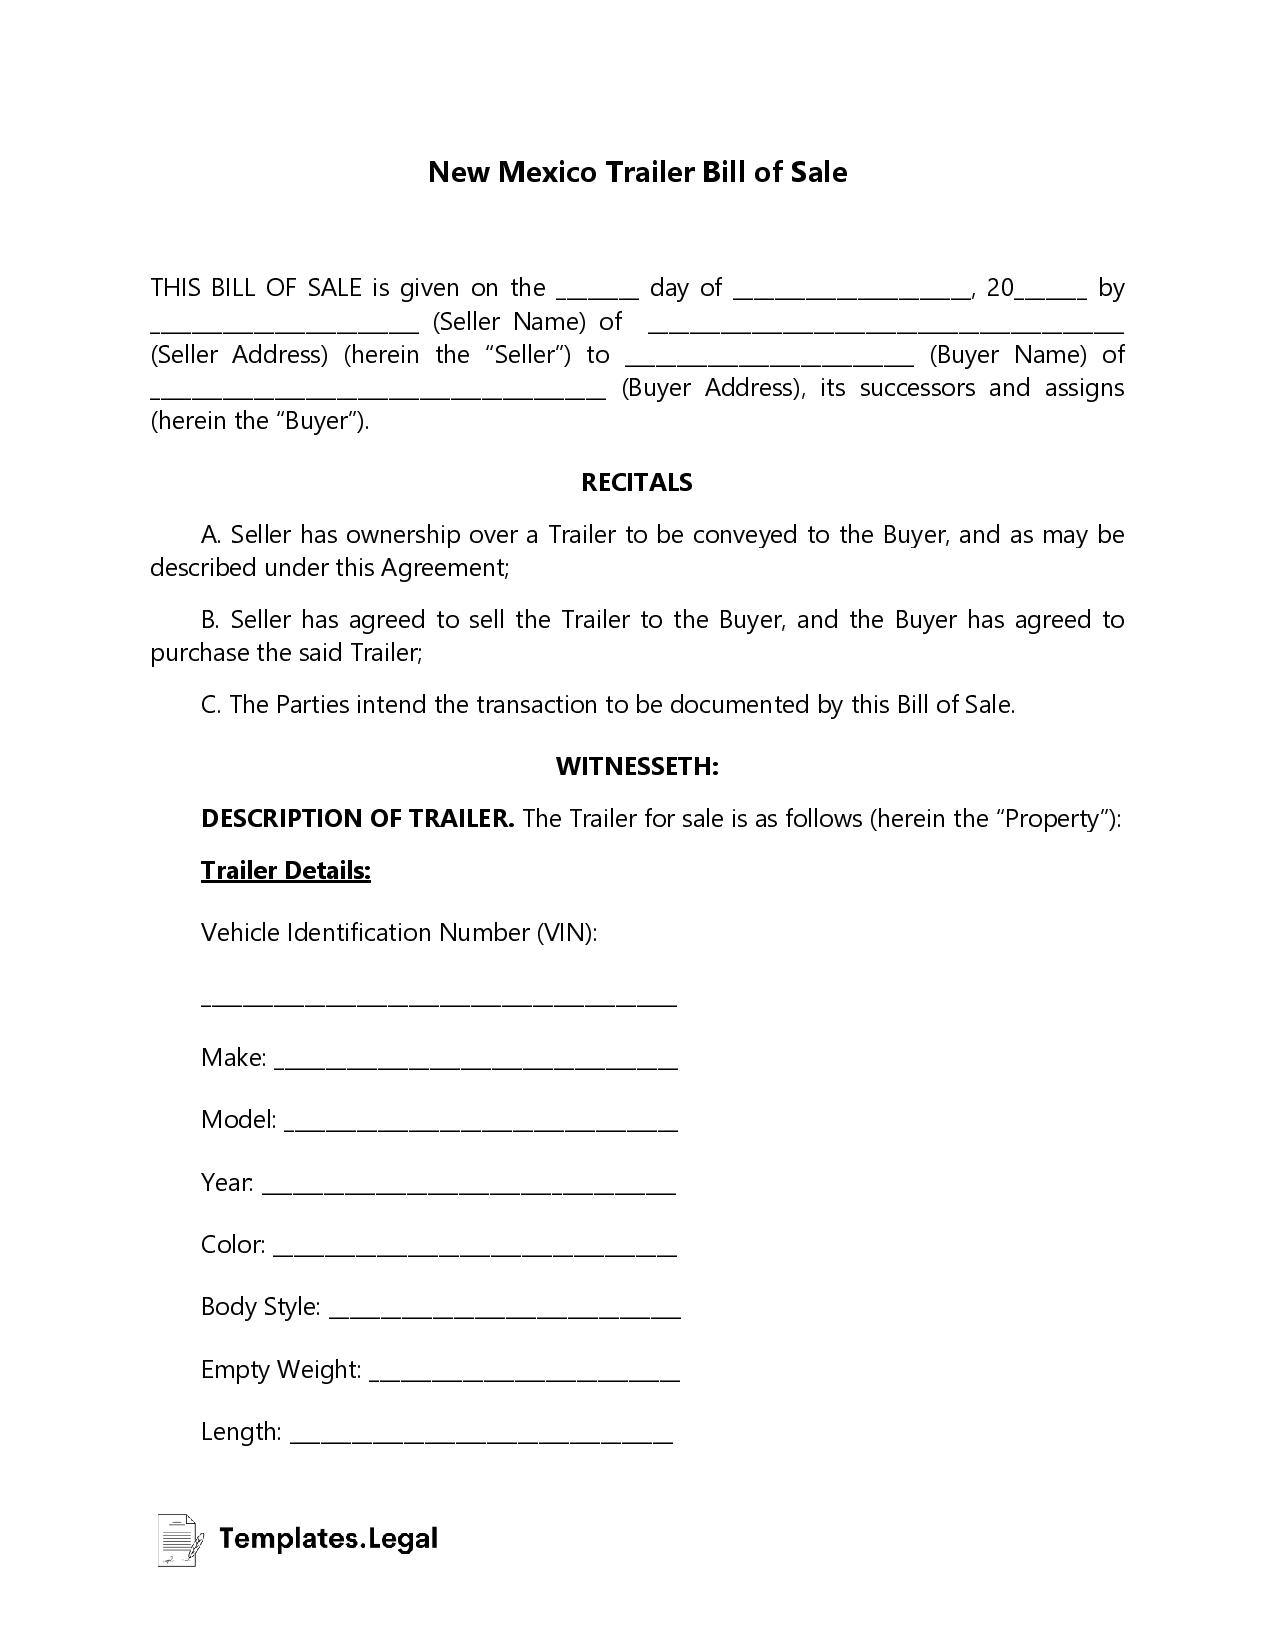 New Mexico Trailer Bill of Sale - Templates.Legal